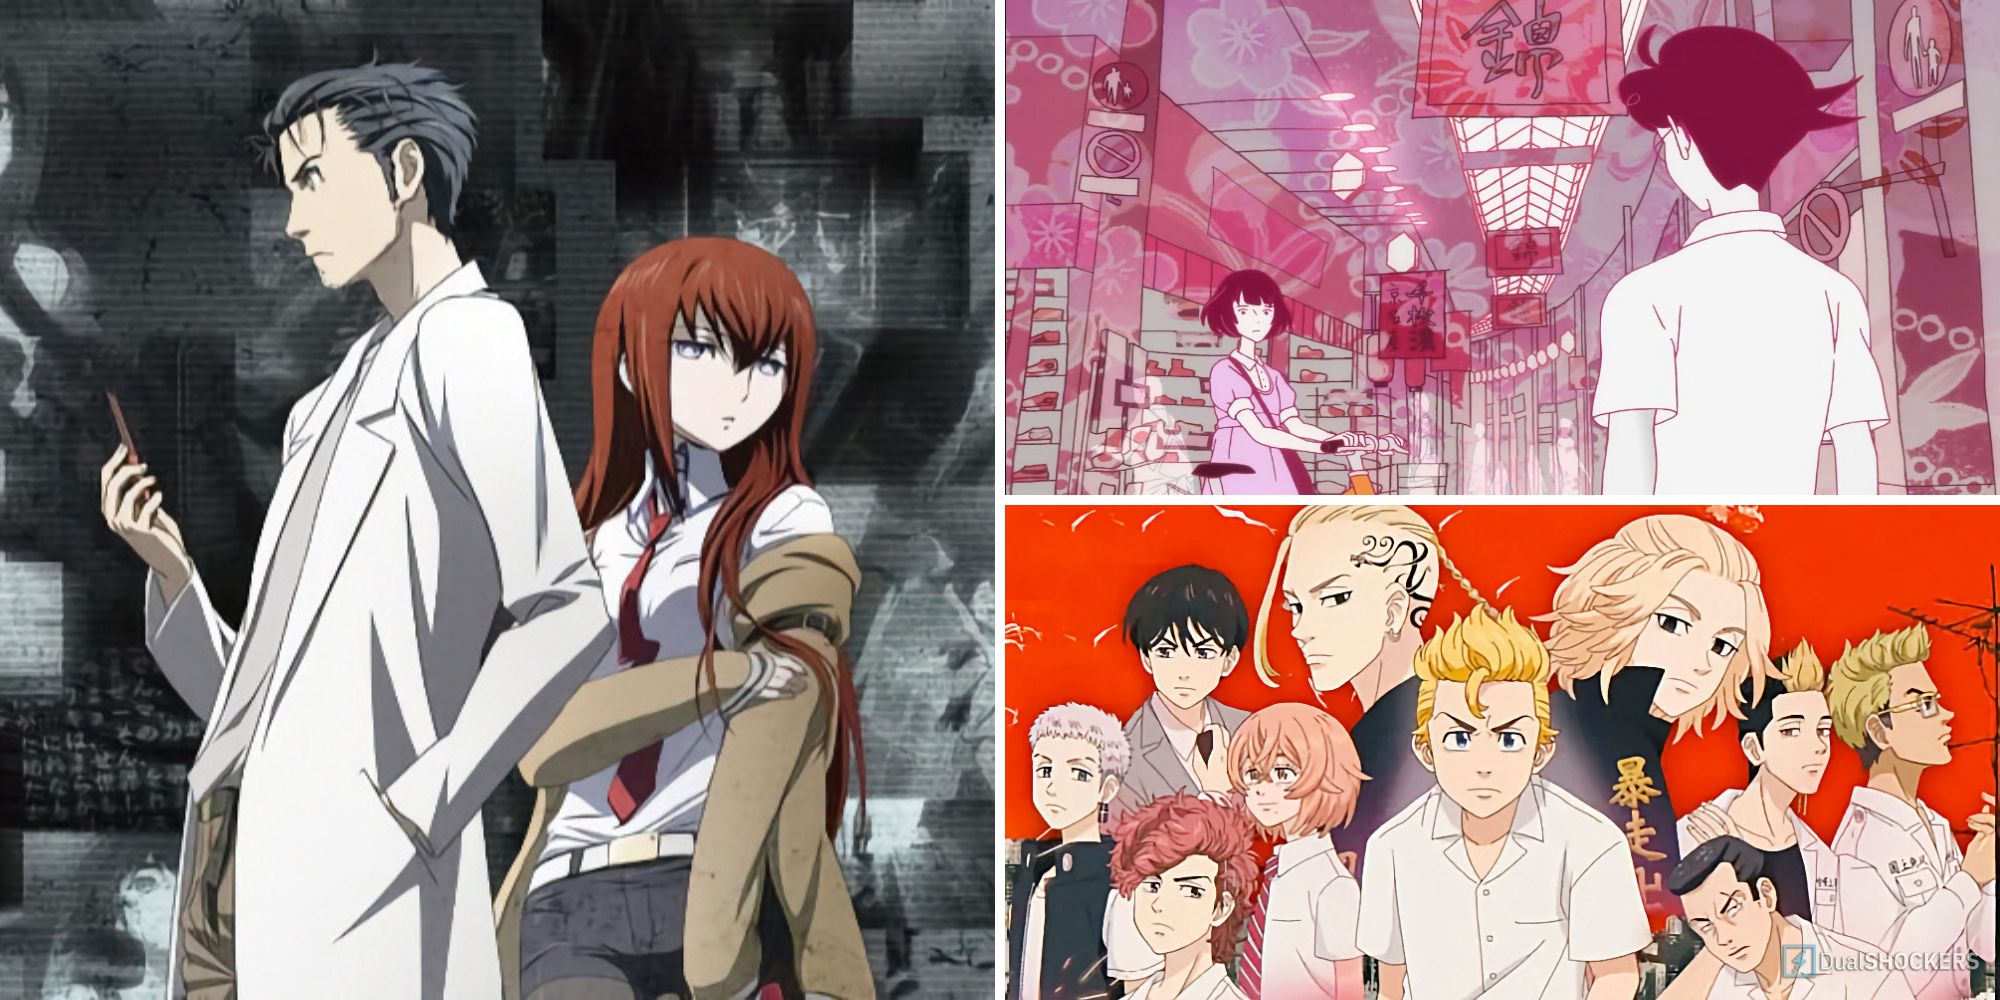 6 Anime Like Steins;Gate [Recommendations]